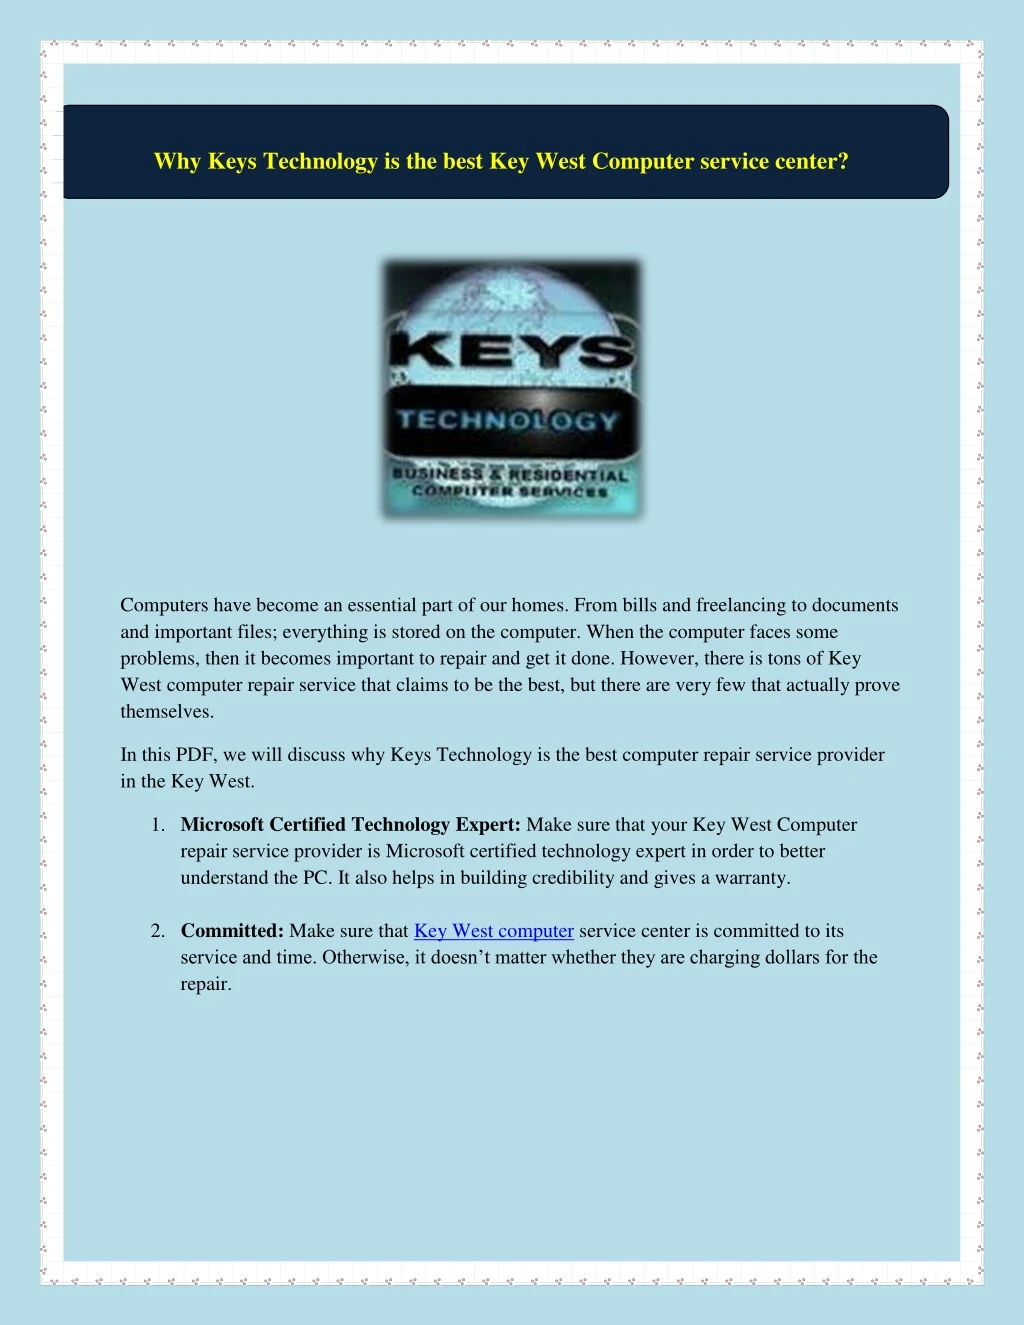 why keys technology is the best key west computer